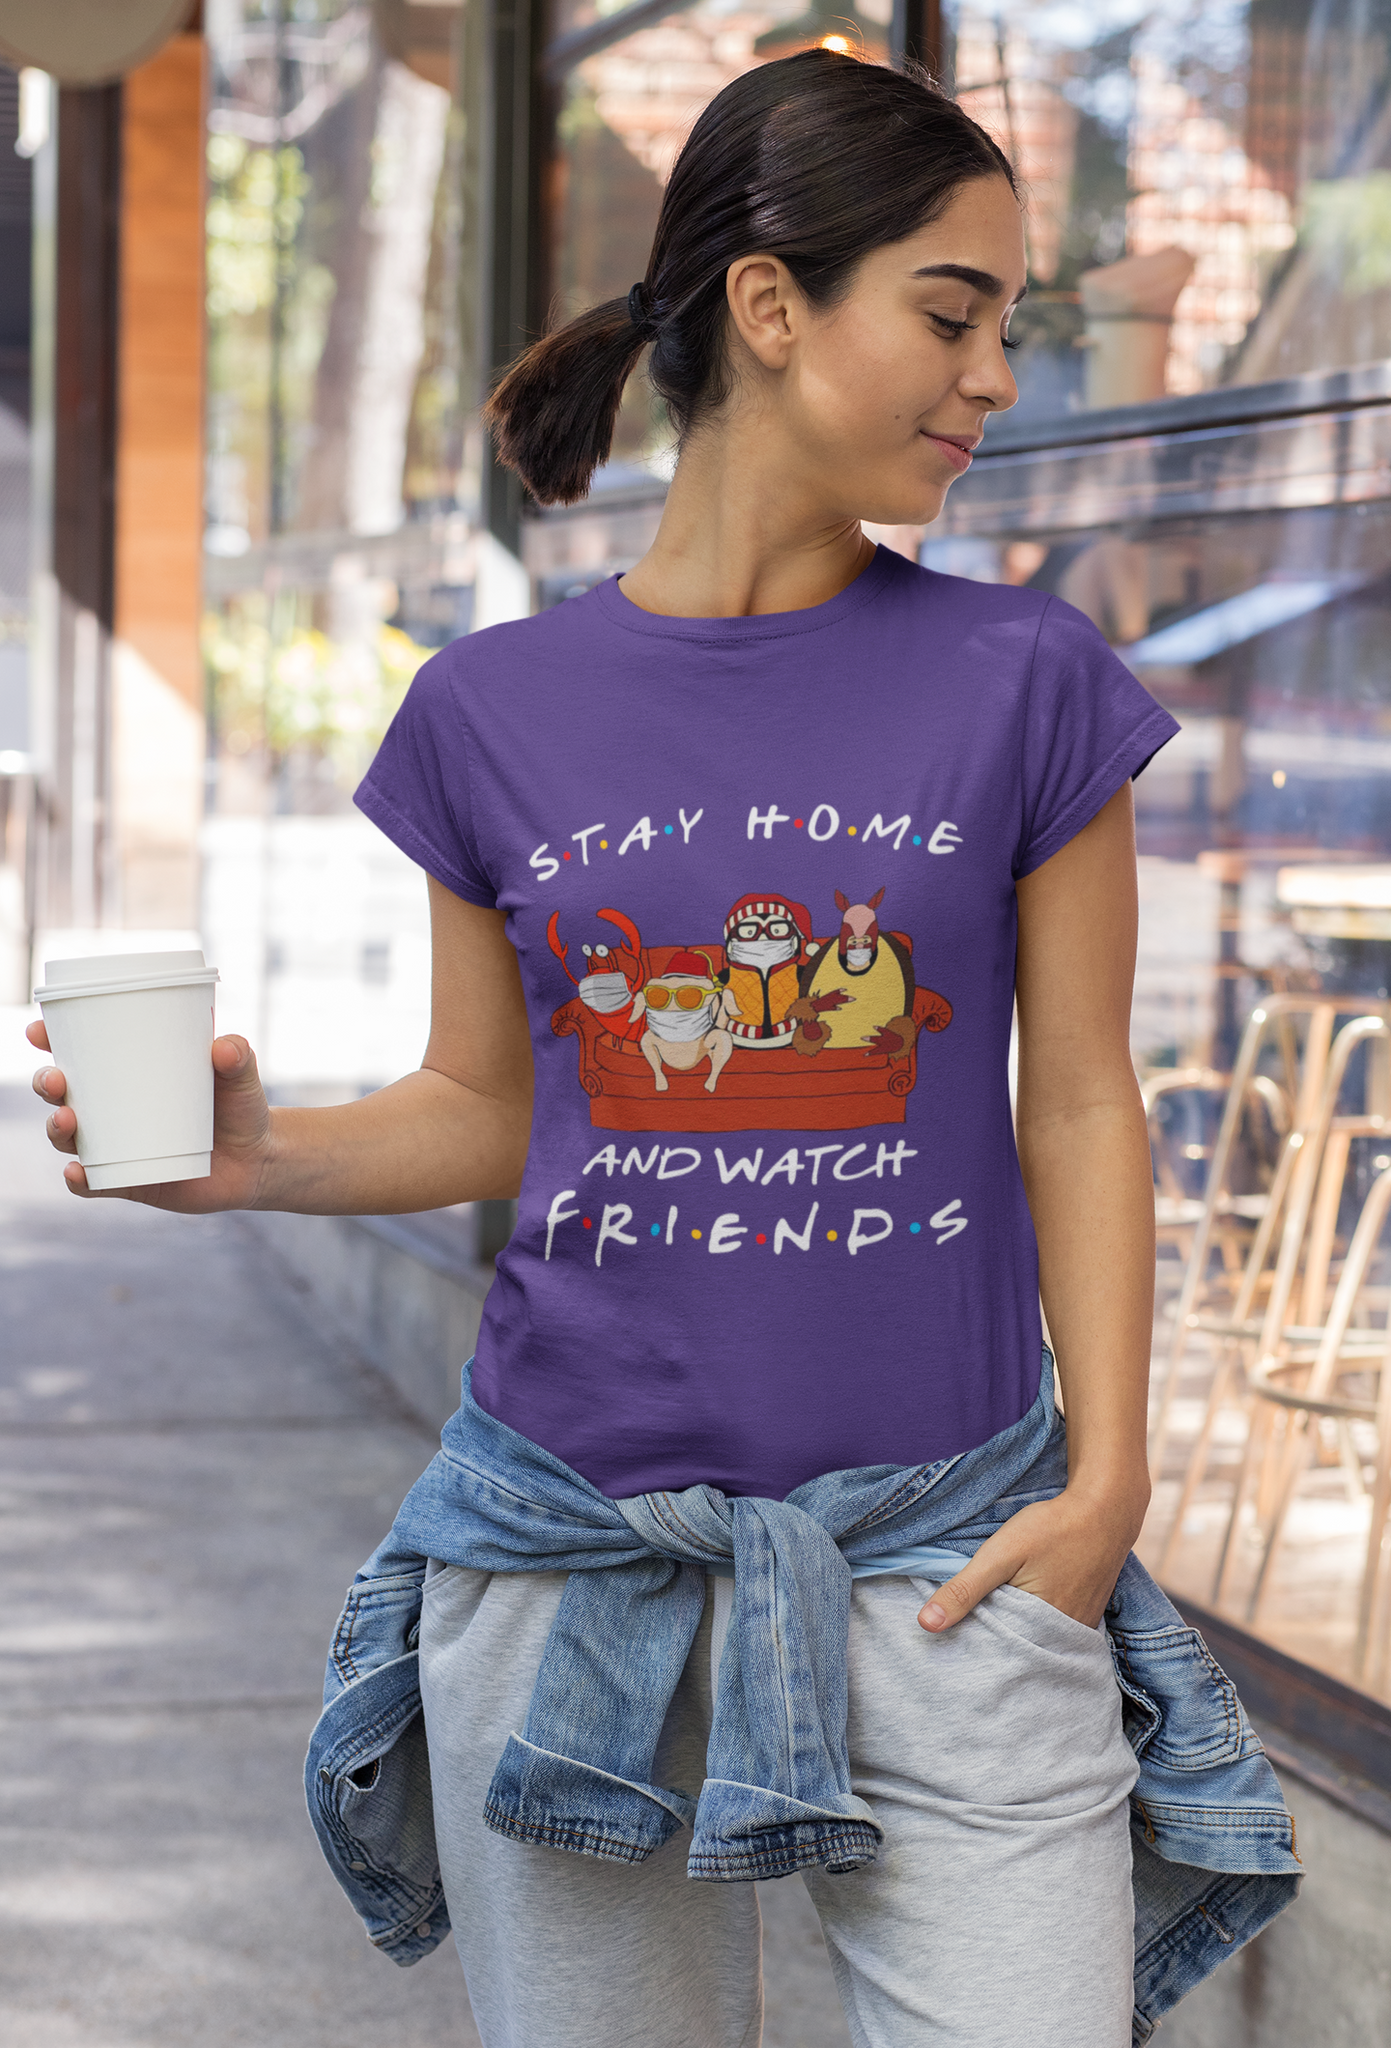 Friends TV Show T Shirt, Friends Characters Costumes T Shirt, Stay Home And Watch Friends Tshirt